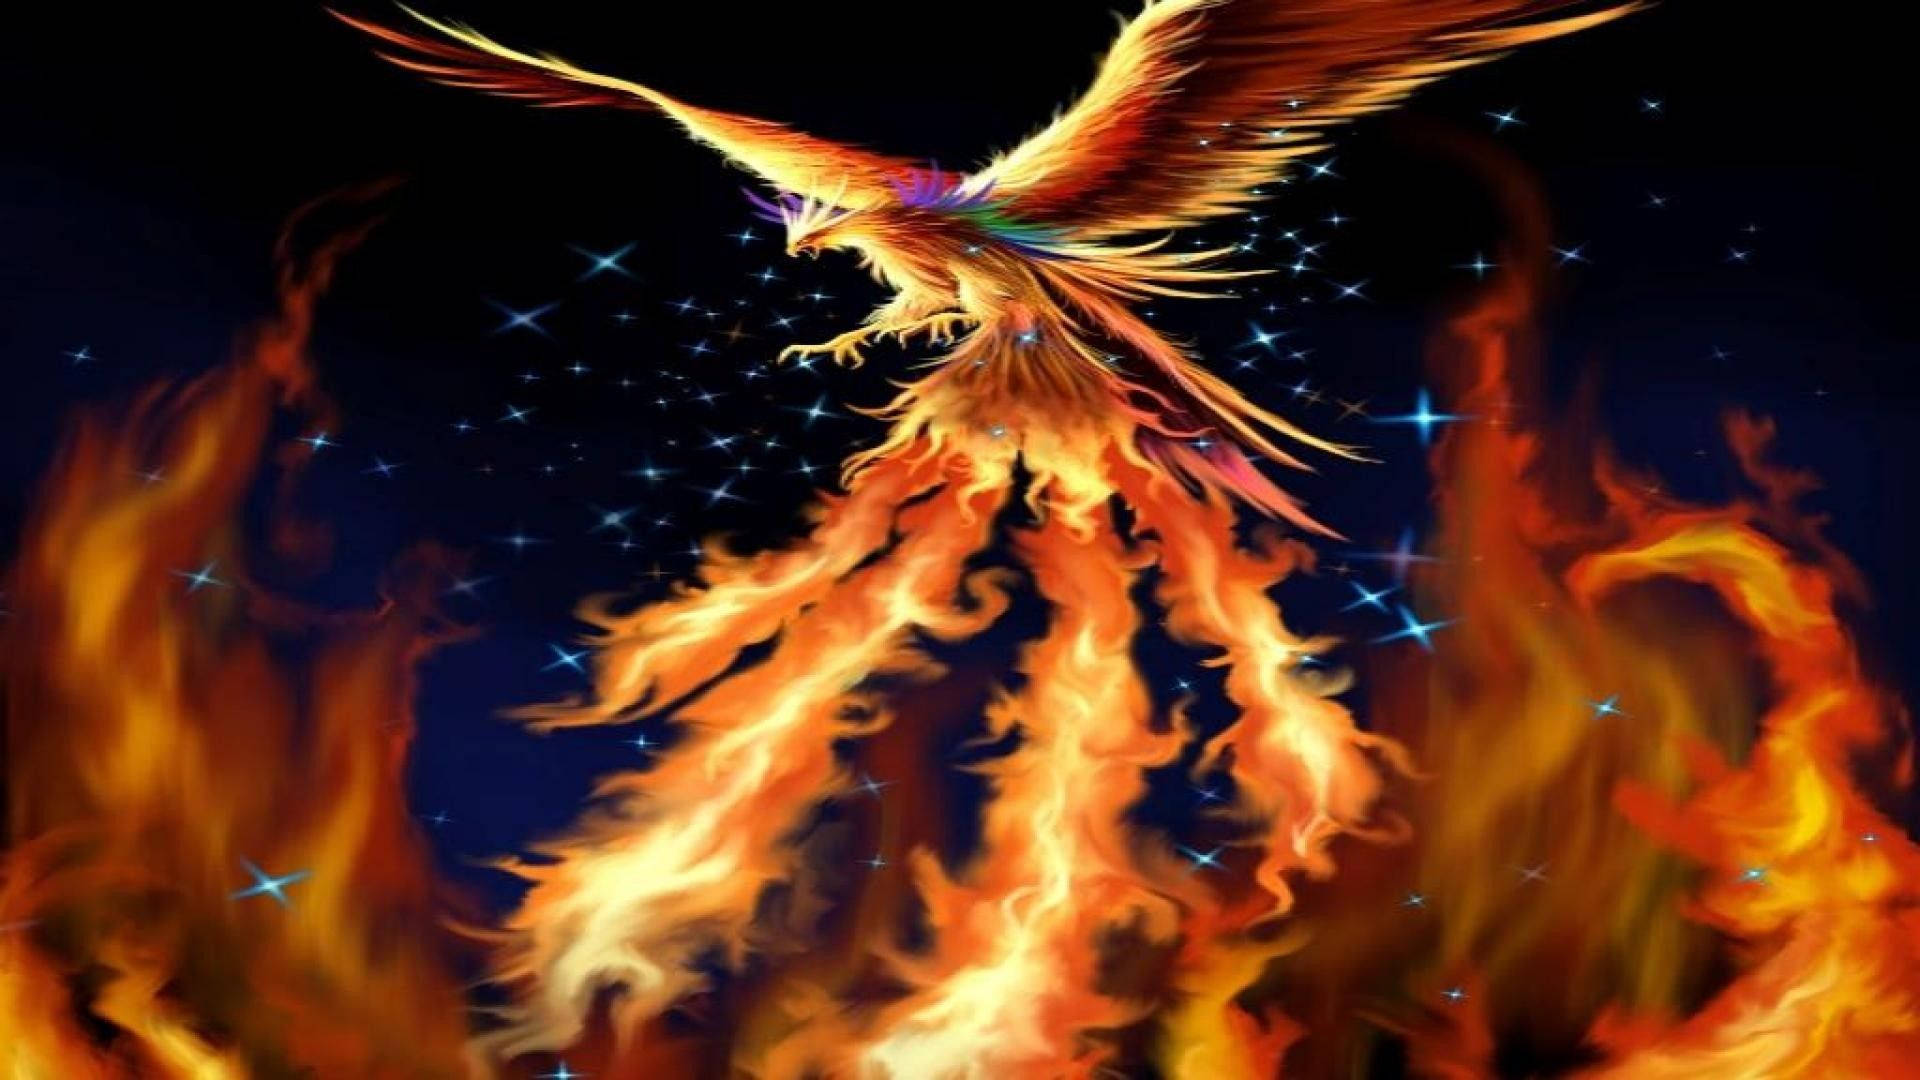 Phoenix spreading its wings and setting the sky on fire Wallpaper